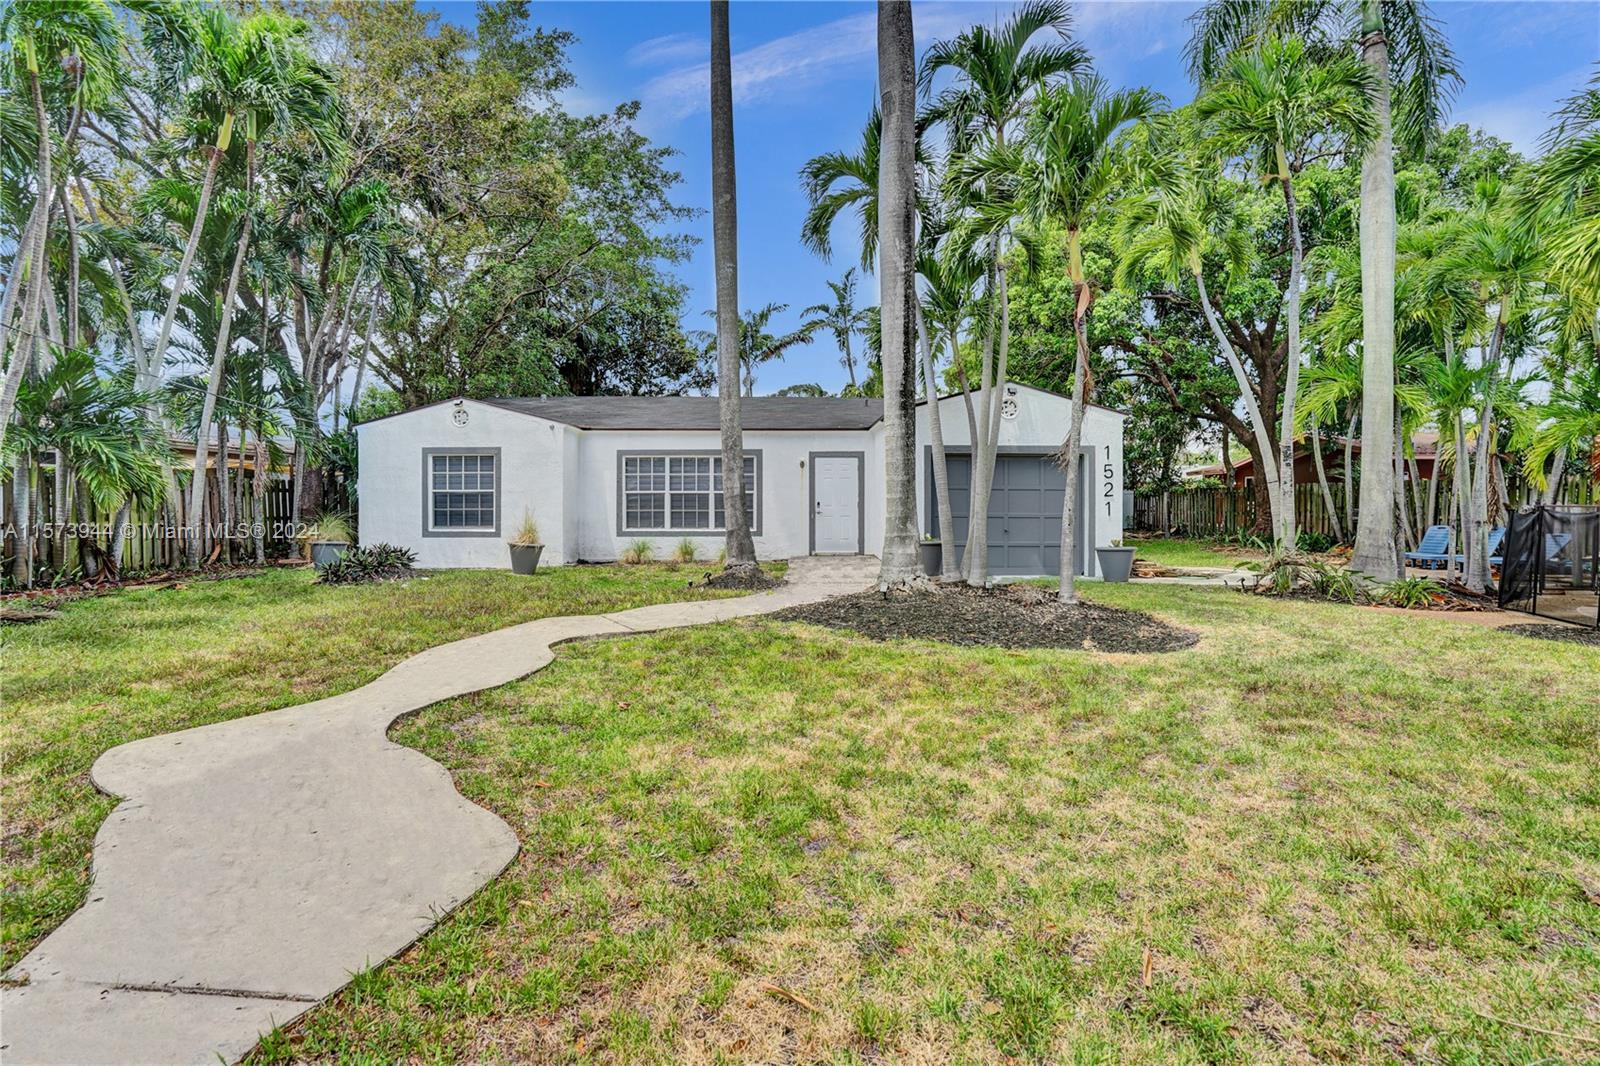 Welcome to this stunning fully remodeled 4-bedroom,2-bath pool home that boasts a full upgrade packa